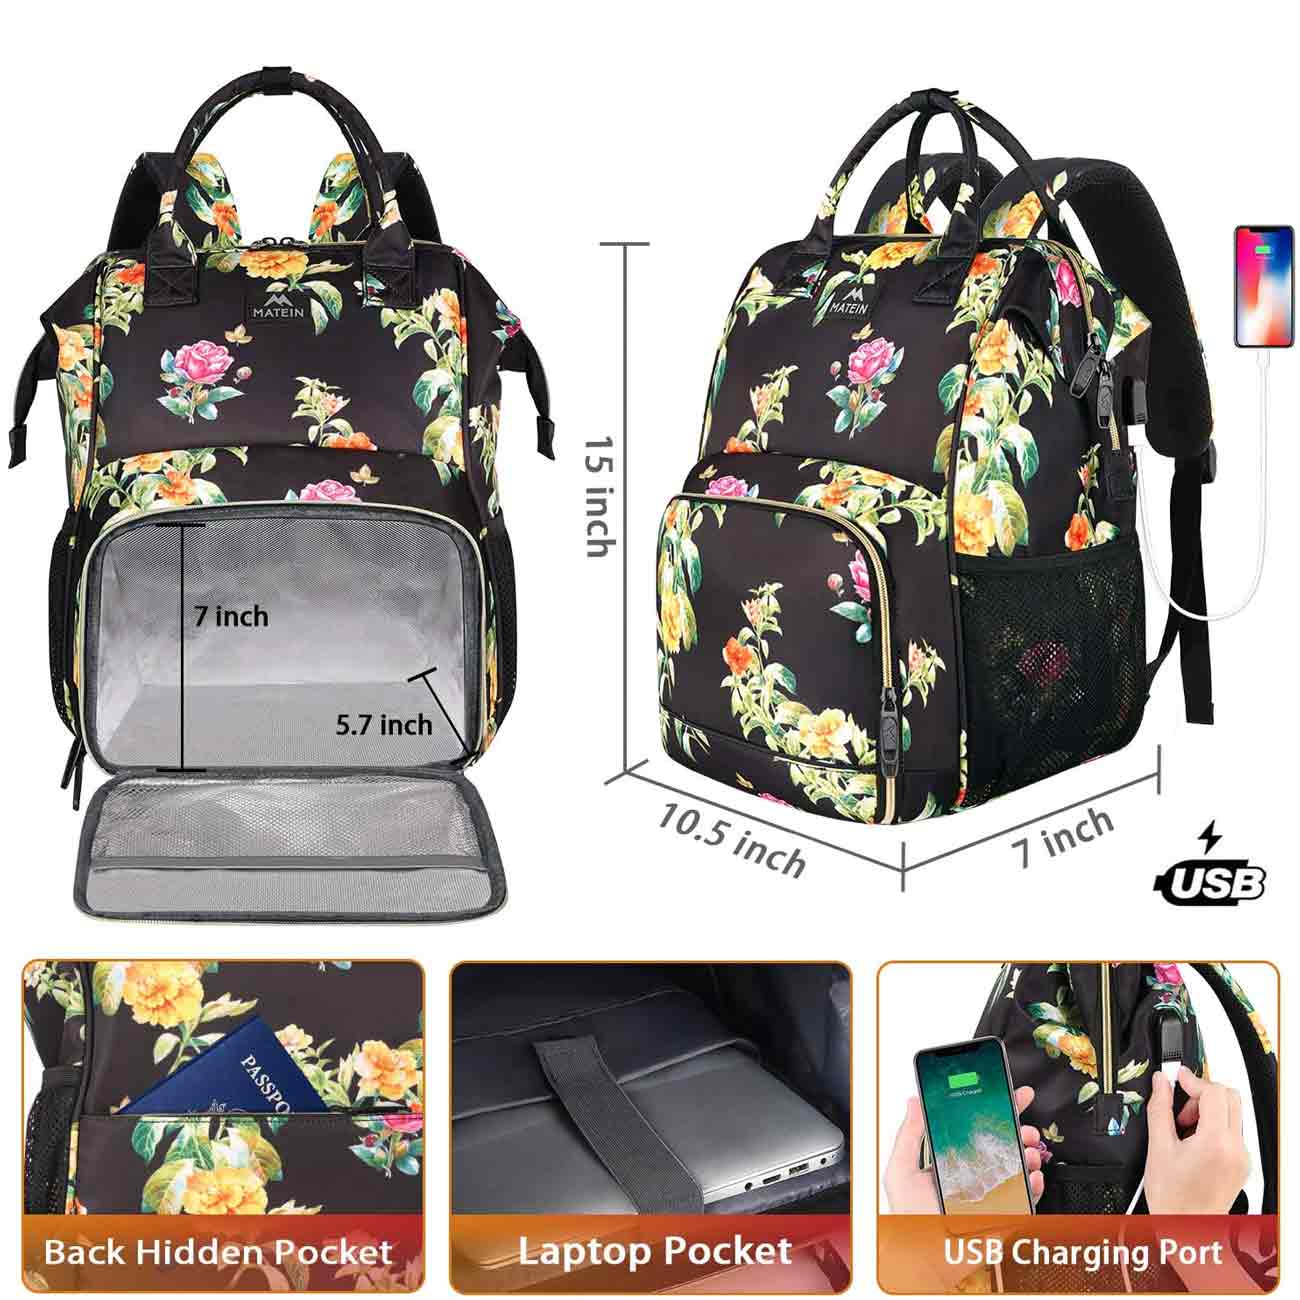 Matein Floral Lunch Box Laptop Backpack - travel laptop backpack